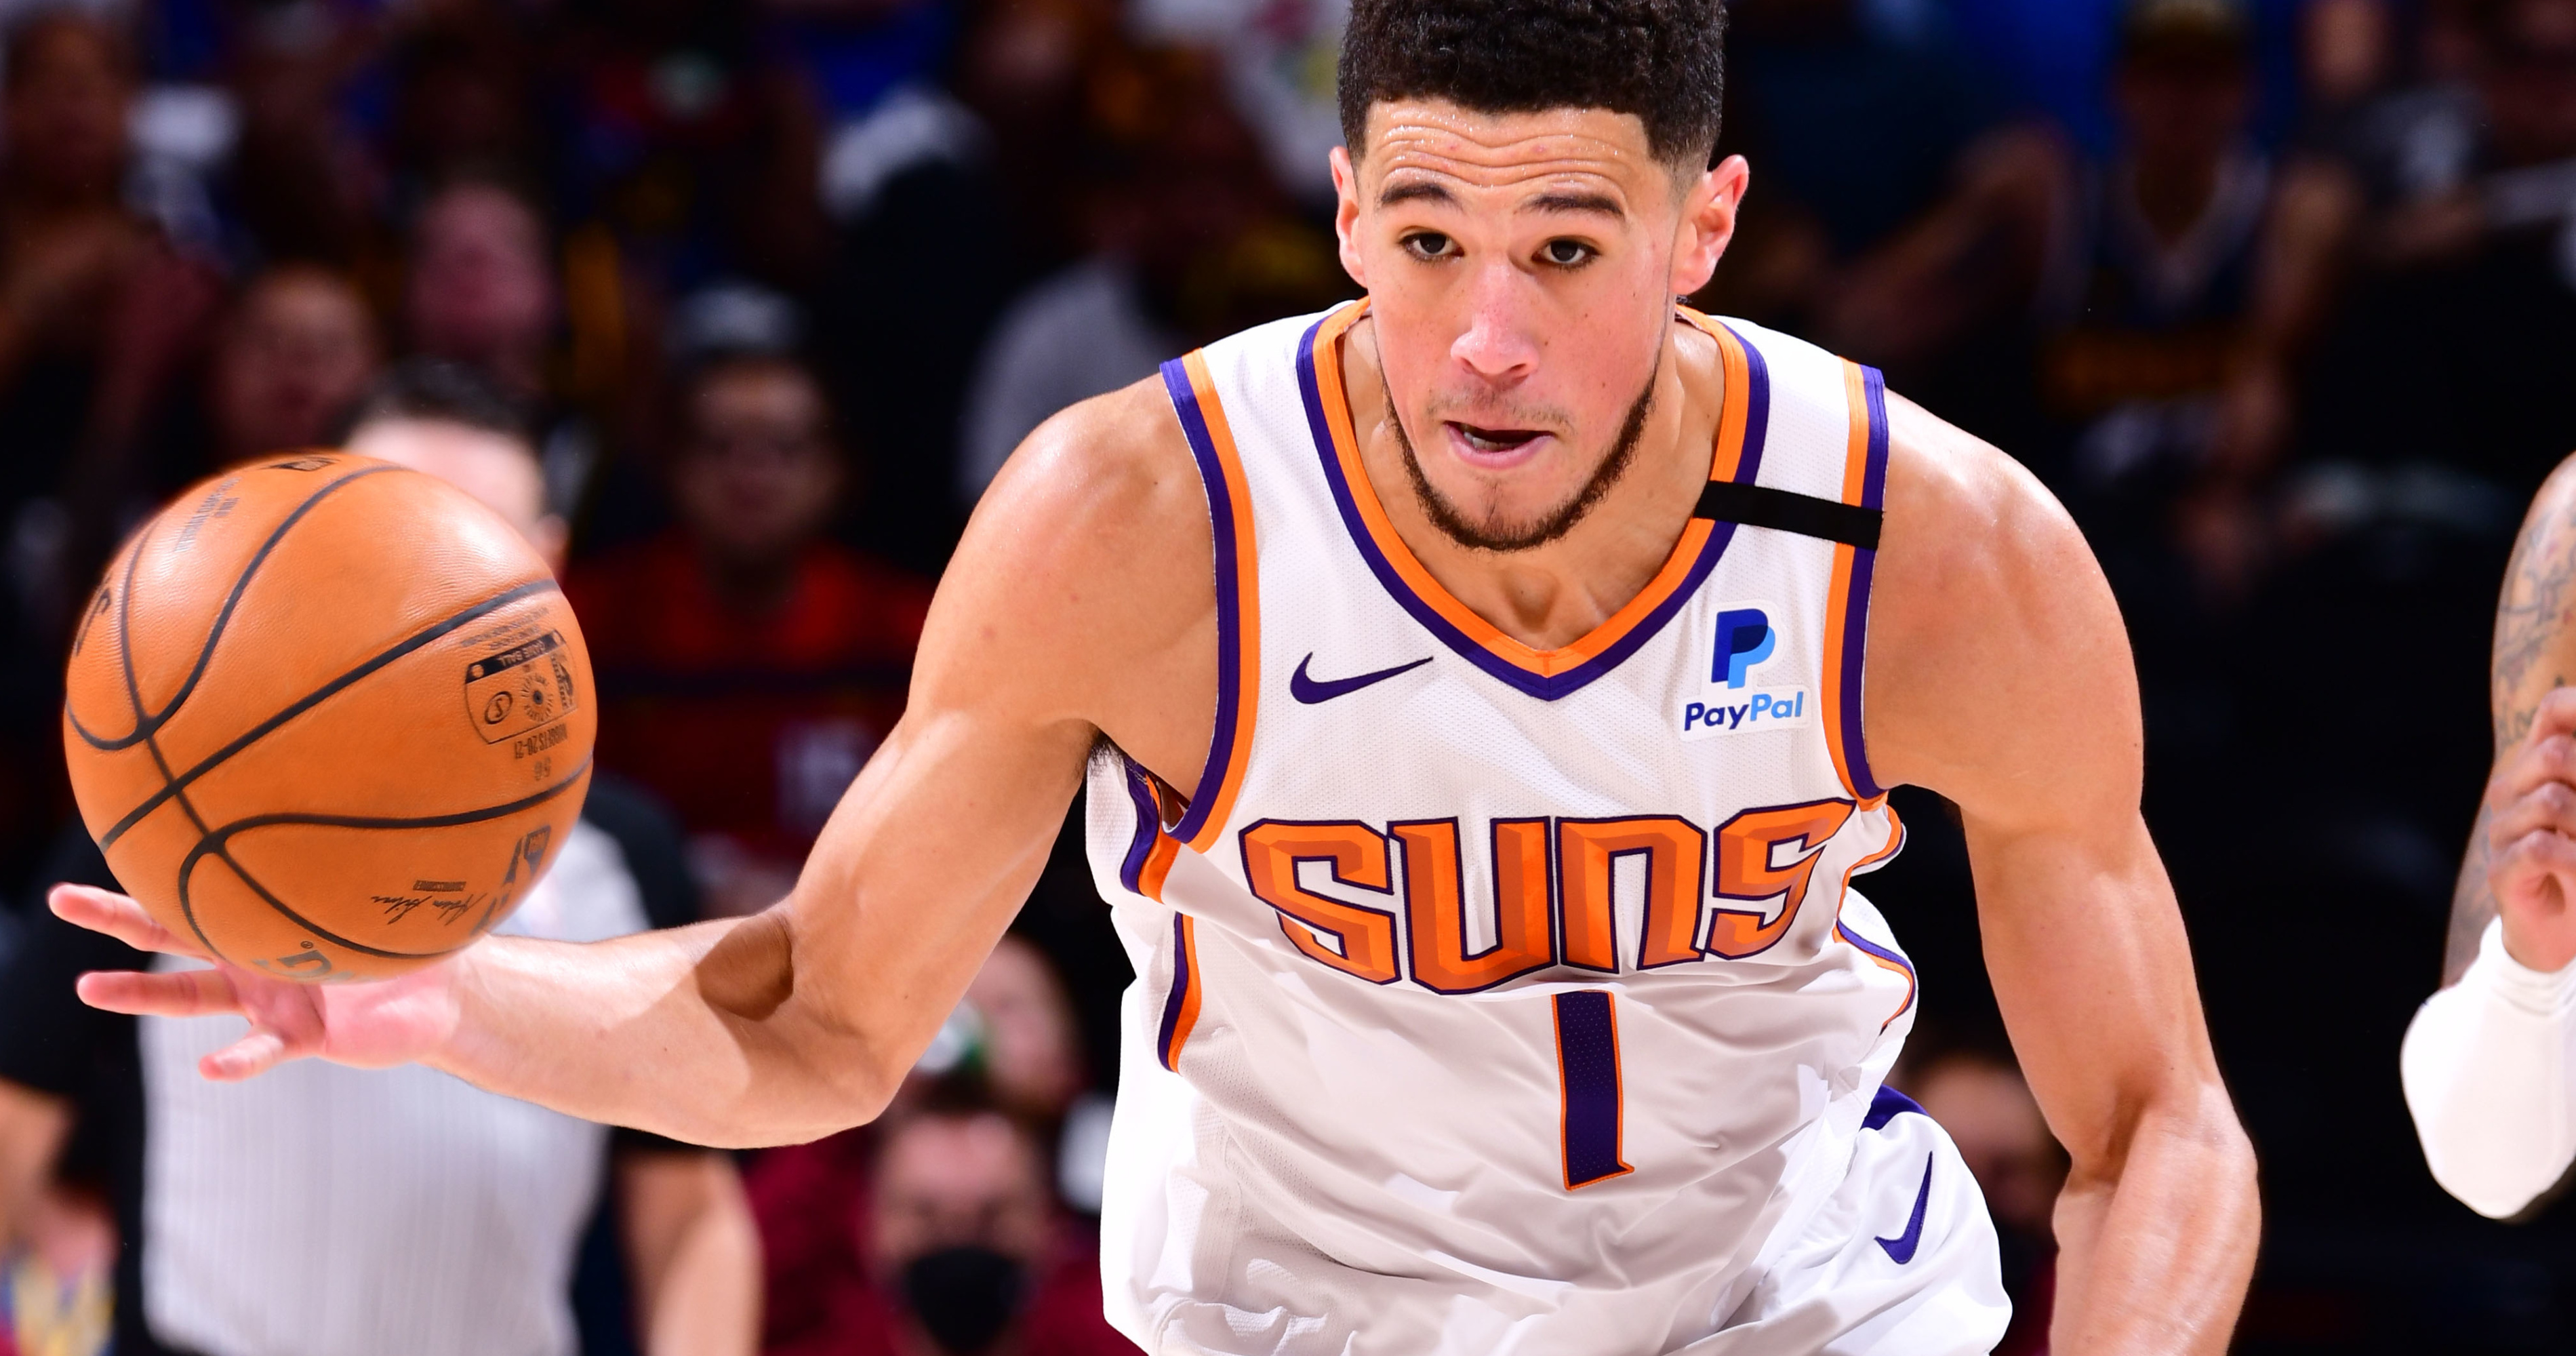 Suns' Devin Booker takes time to make young fan's night in Denver